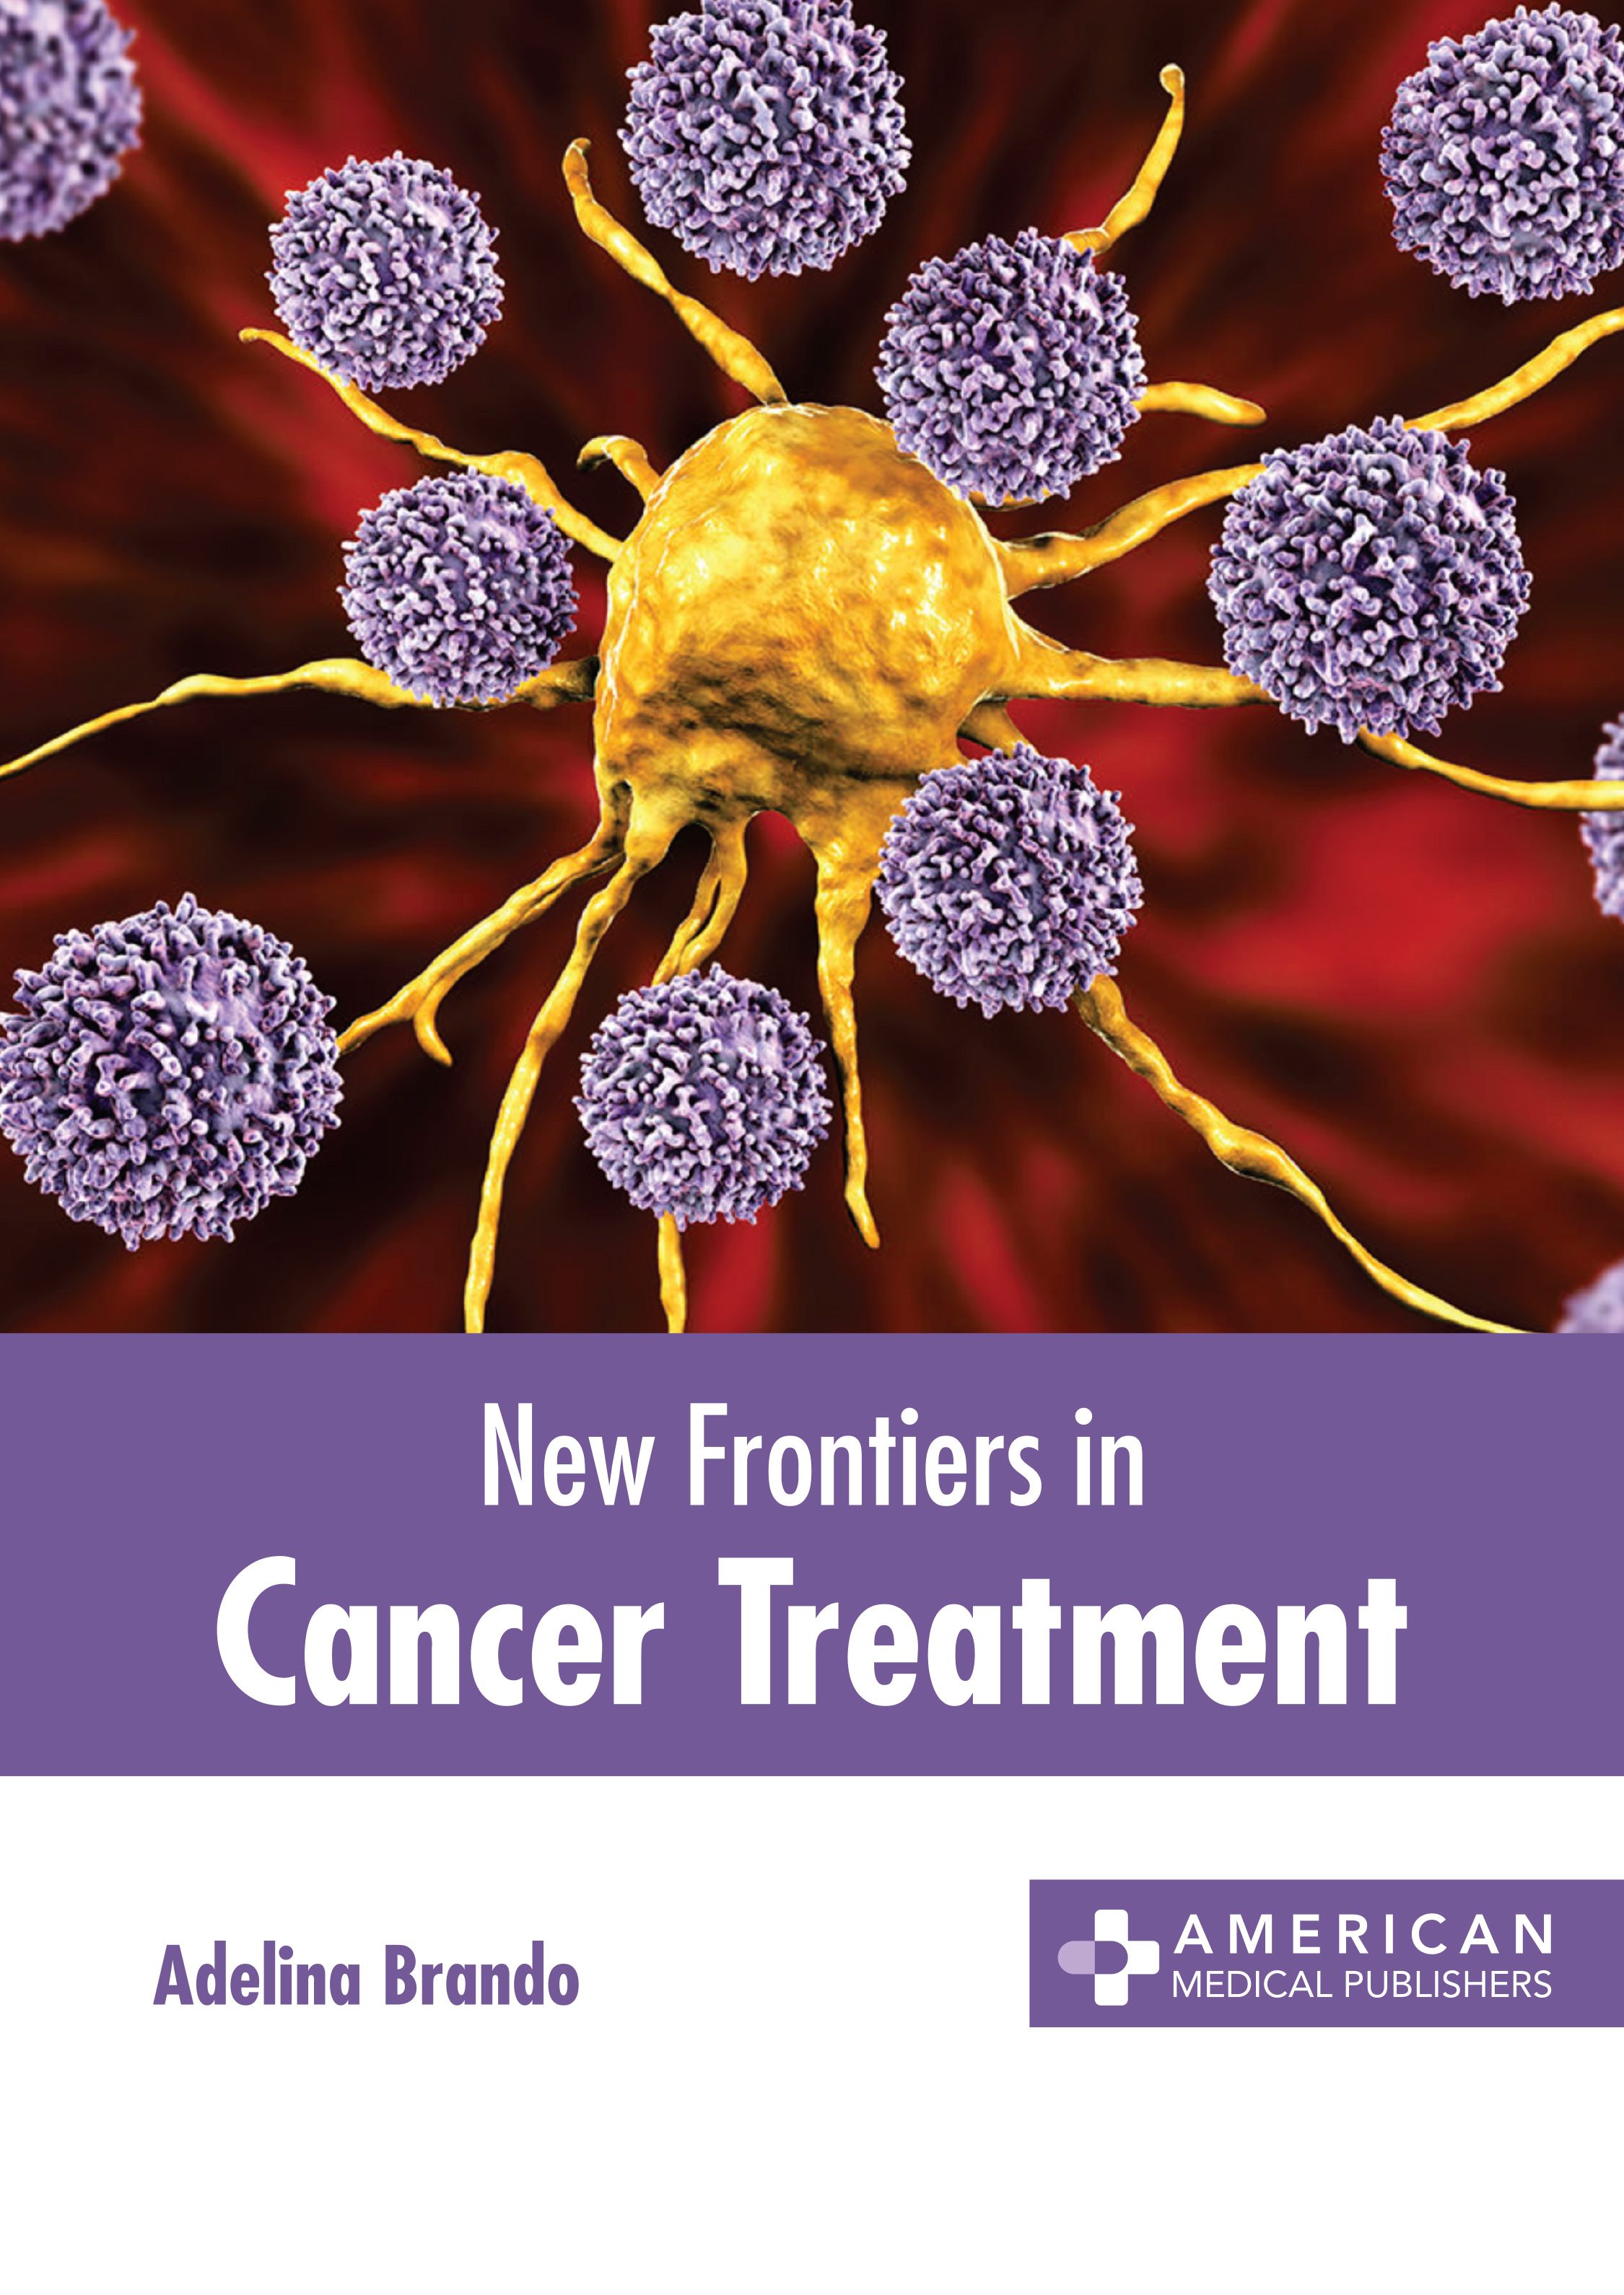 NEW FRONTIERS IN CANCER TREATMENT